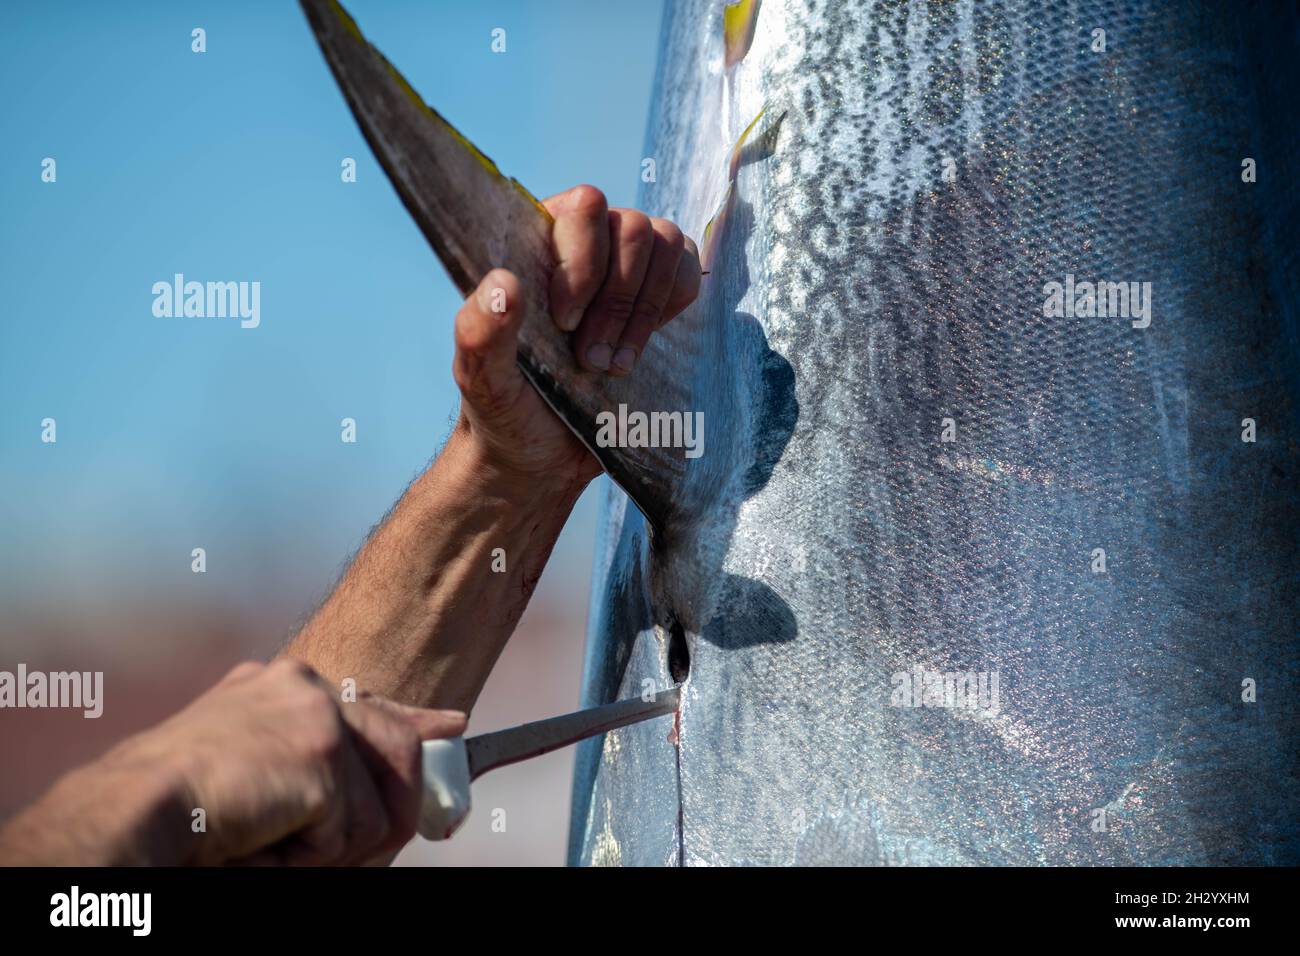 The fin of a large Atlantic bluefin tuna hanging by a rope after being freshly caught in saltwater. The chef has his hand around the fin. Stock Photo